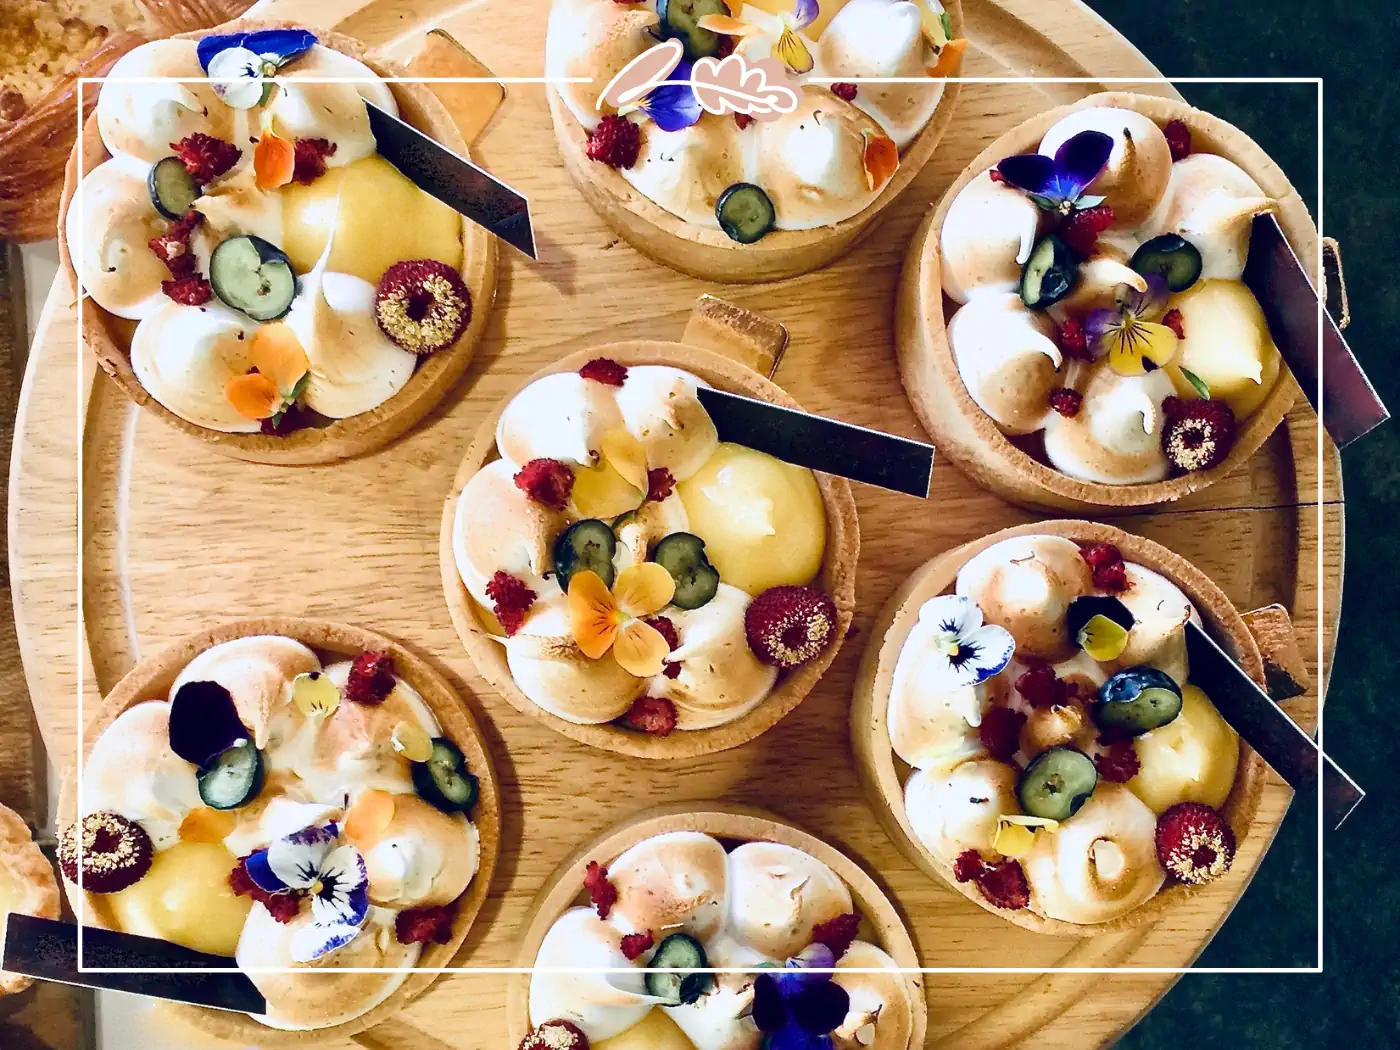 Small dessert cups garnished with edible flowers and berries. Fabulous Flowers and Gifts.